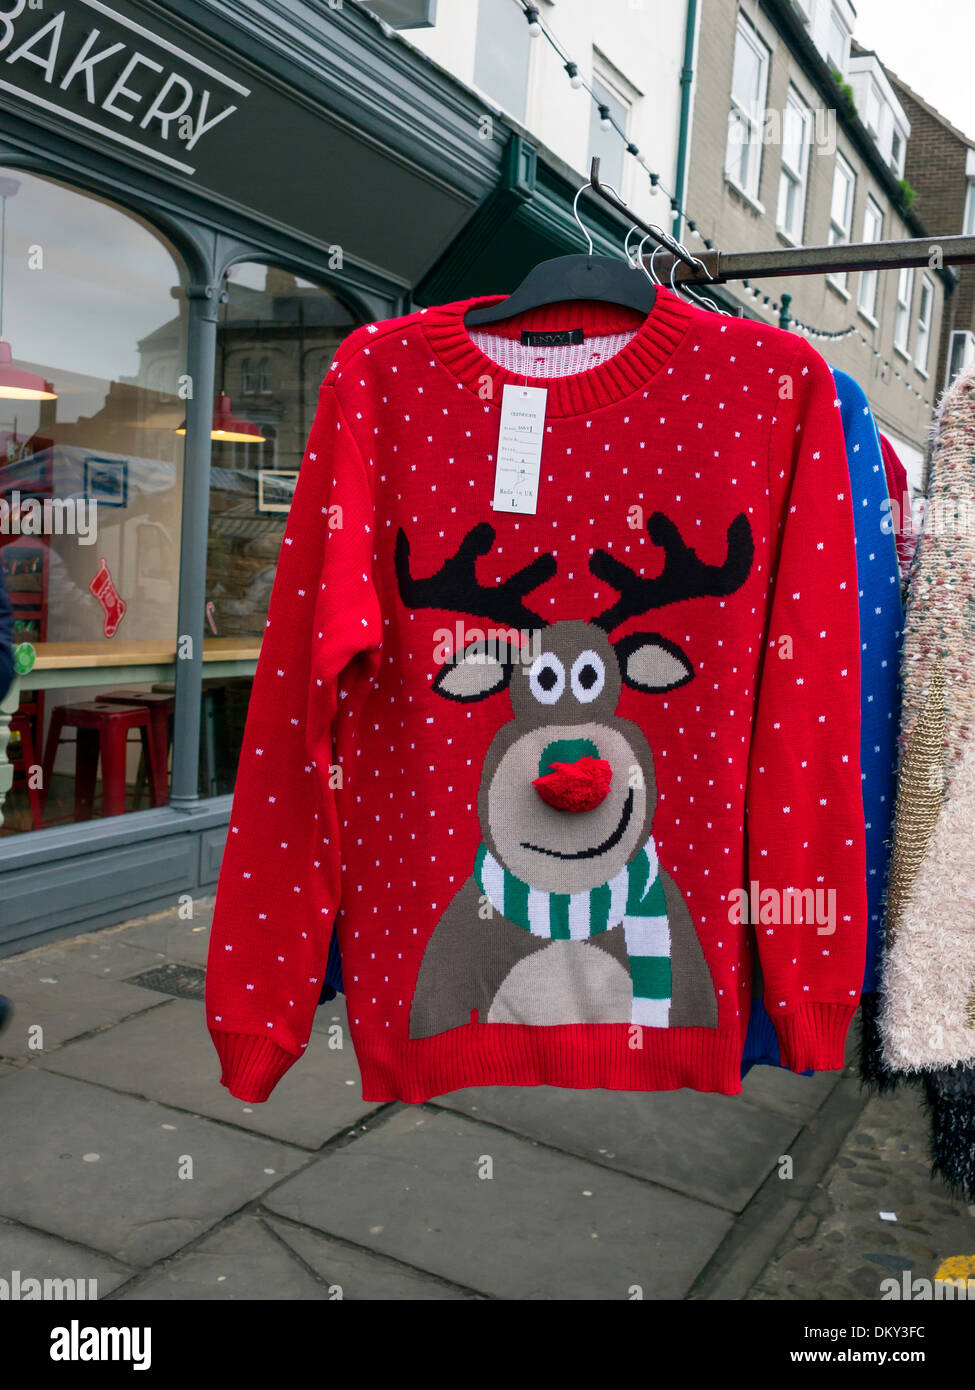 Market stall Christmas novelty sale red knitted jumper with smiling Rudolph the red nosed reindeer pattern Stock Photo